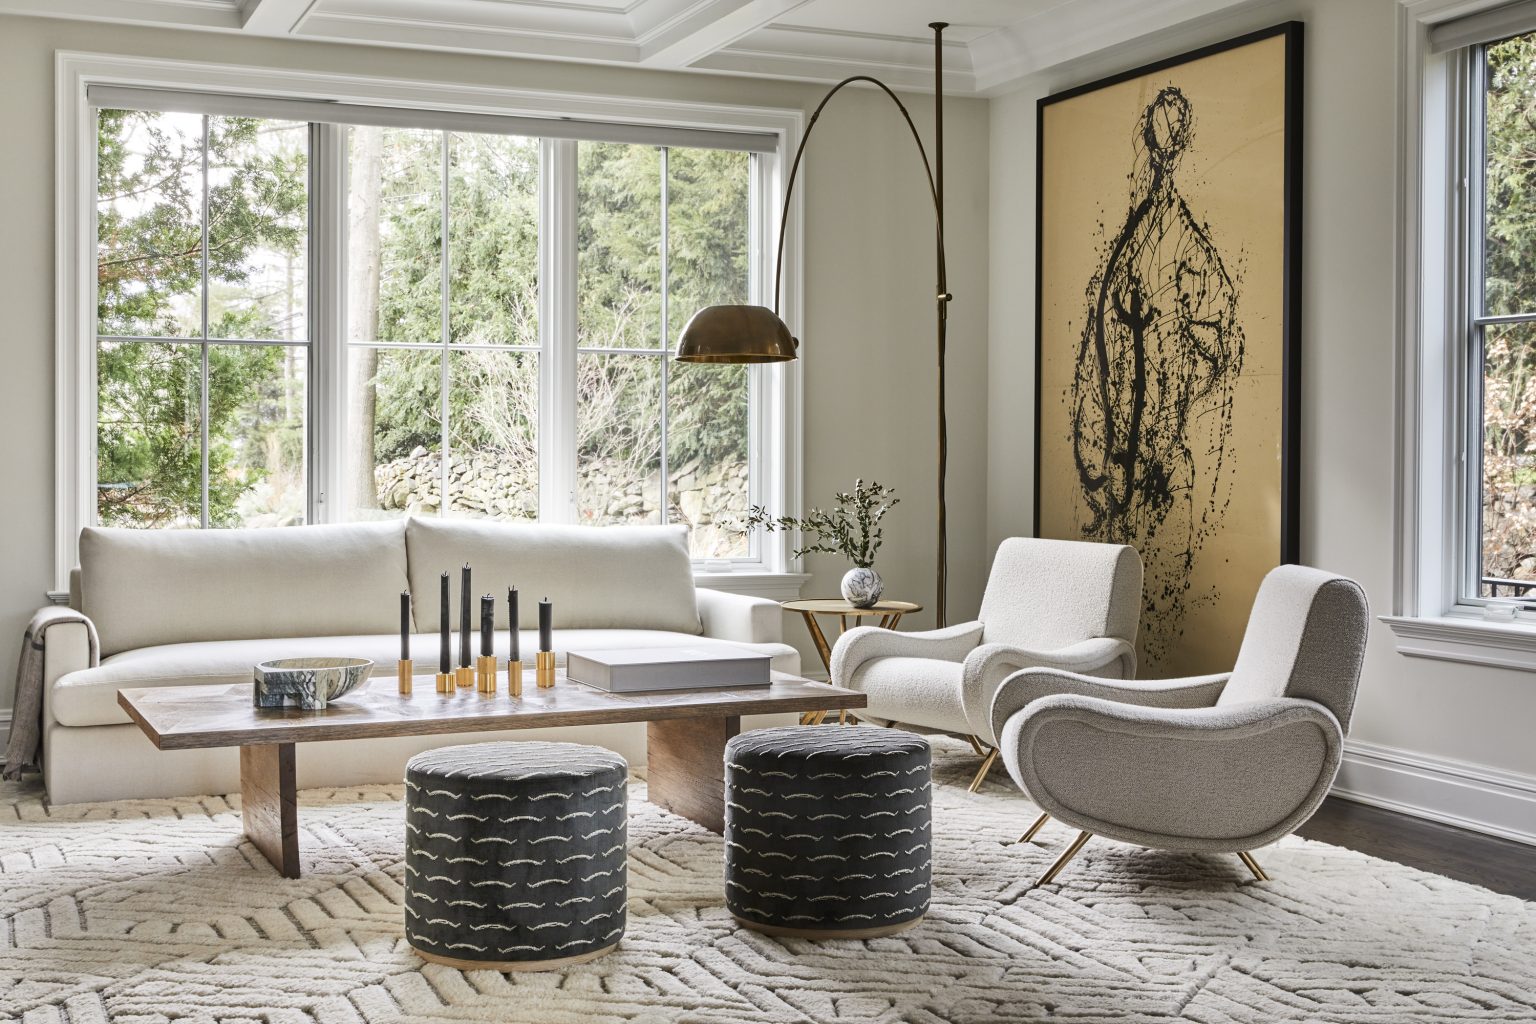 Sharon Rembaum - A Tour Calm New York Home With Timeless Appeal